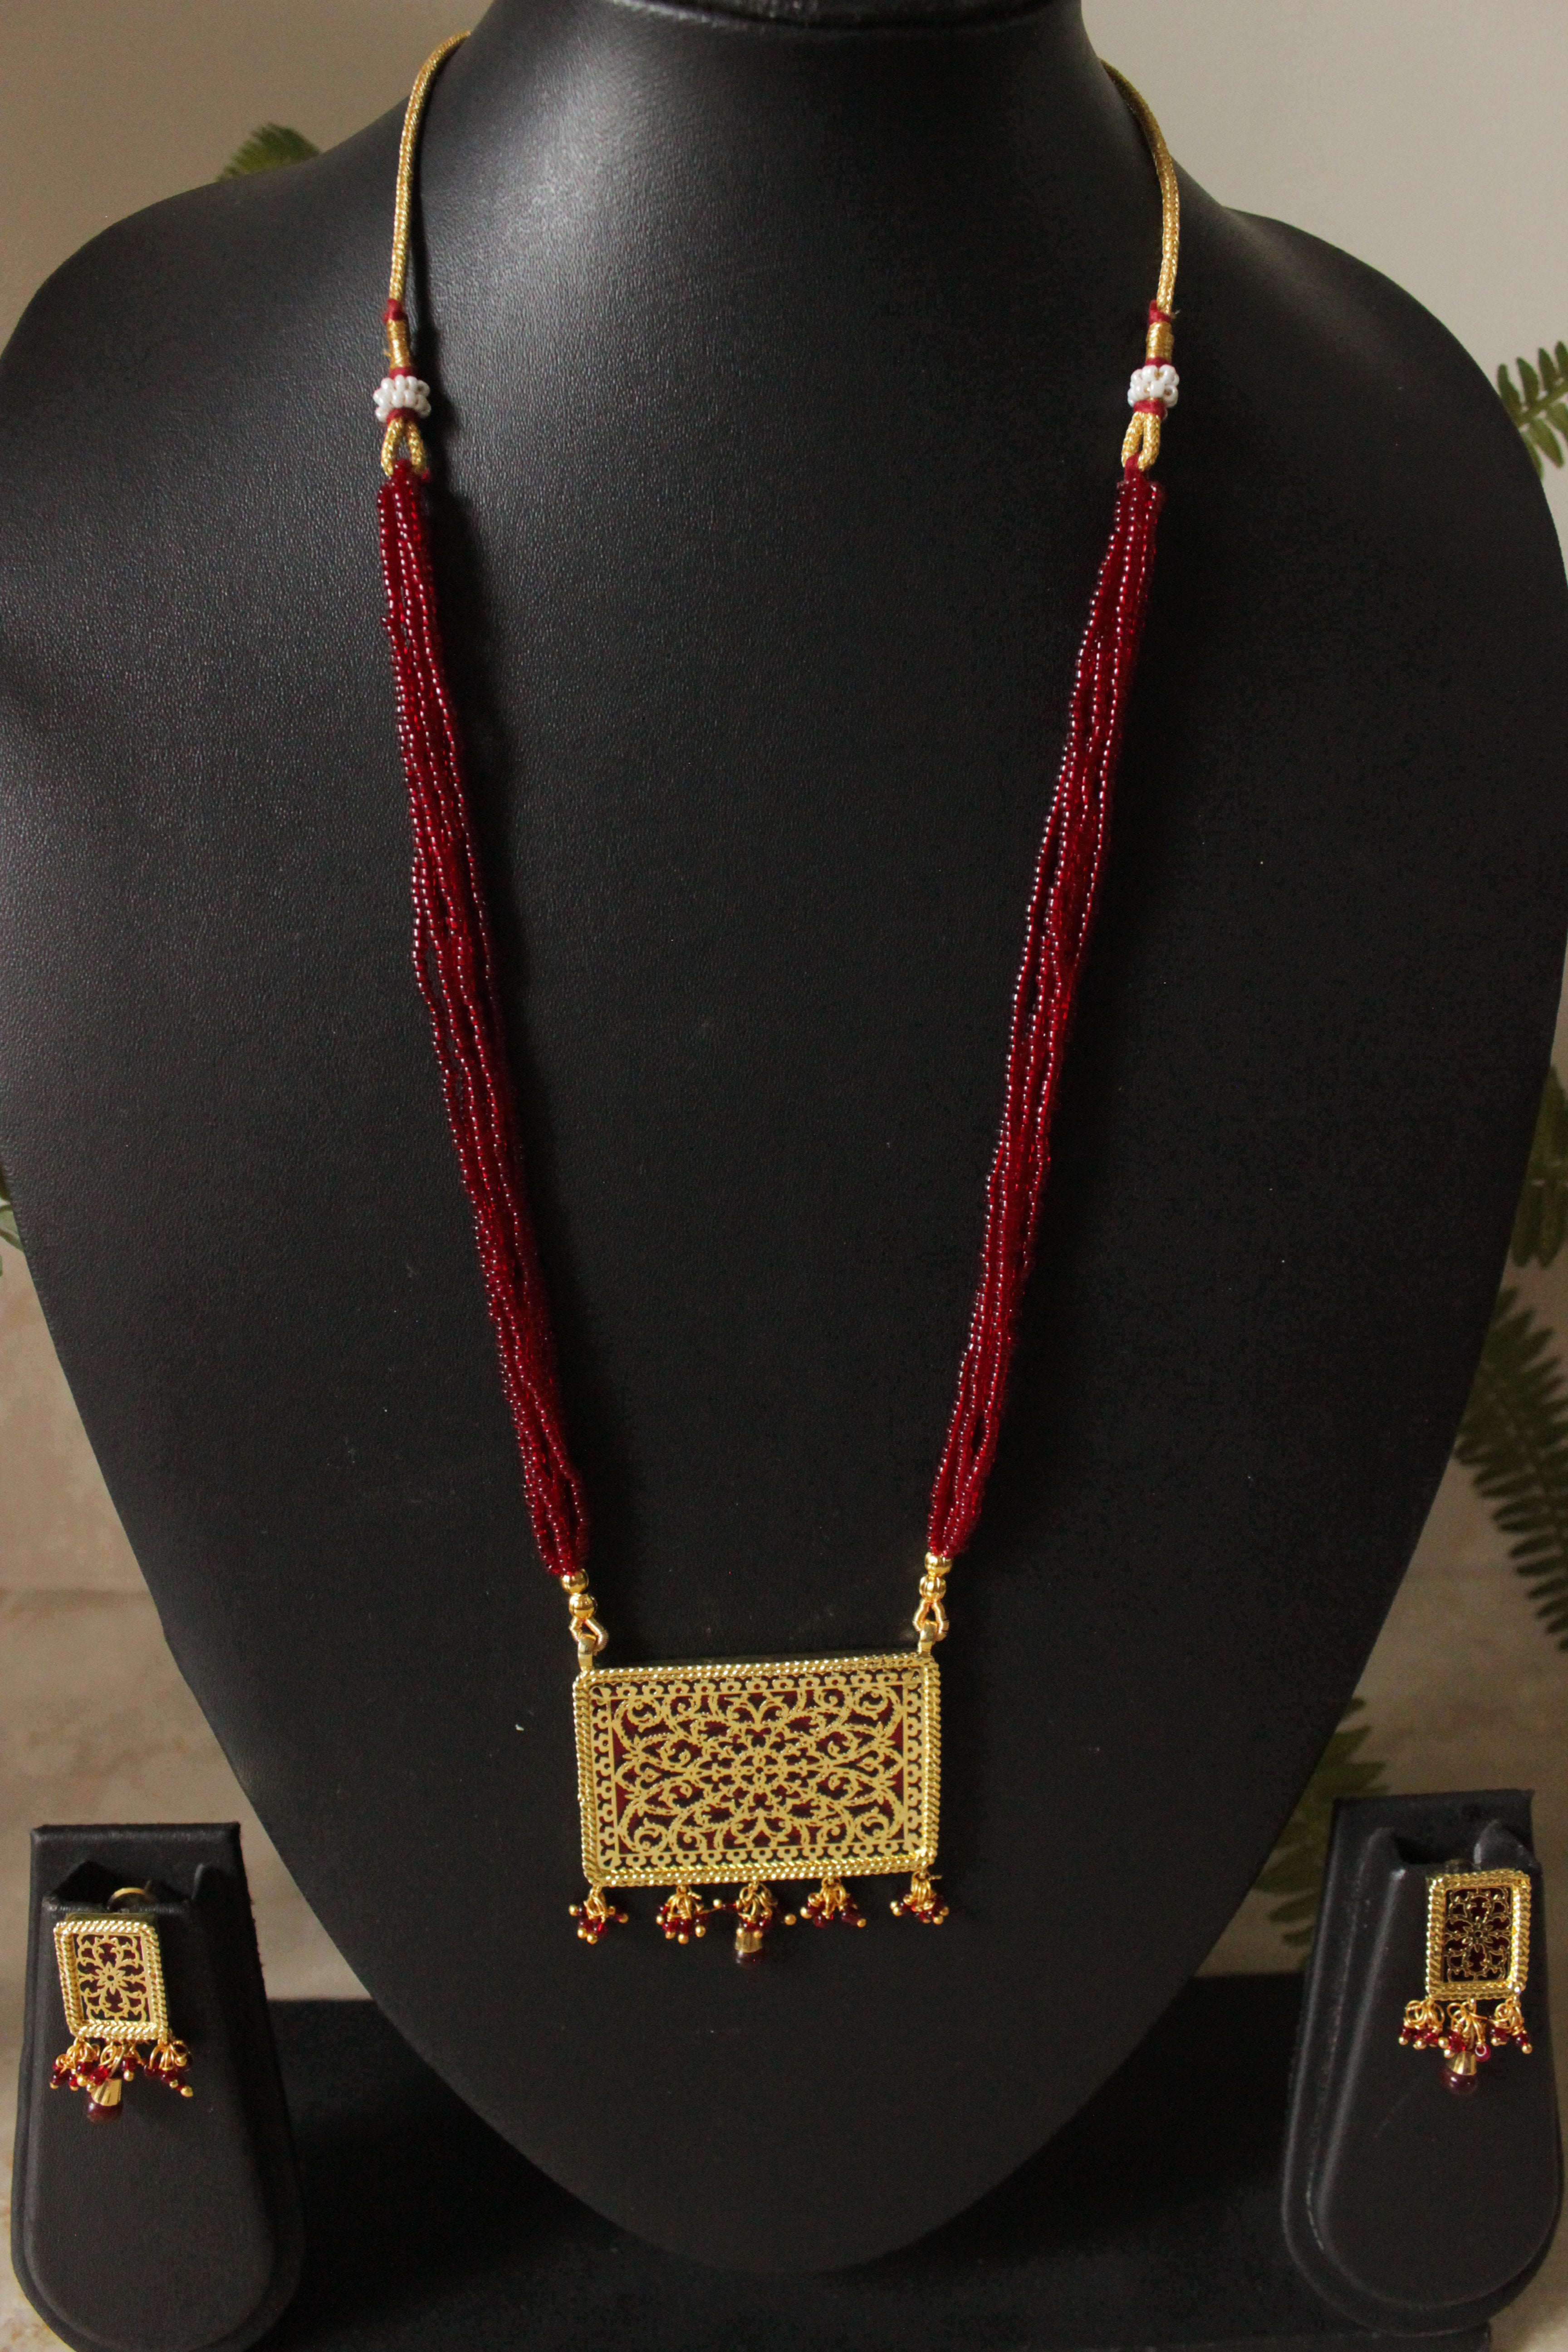 Intricately Detailed Gold Toned Rectangular Pendant Necklace Set with Multi-Layer Red Beads Closure